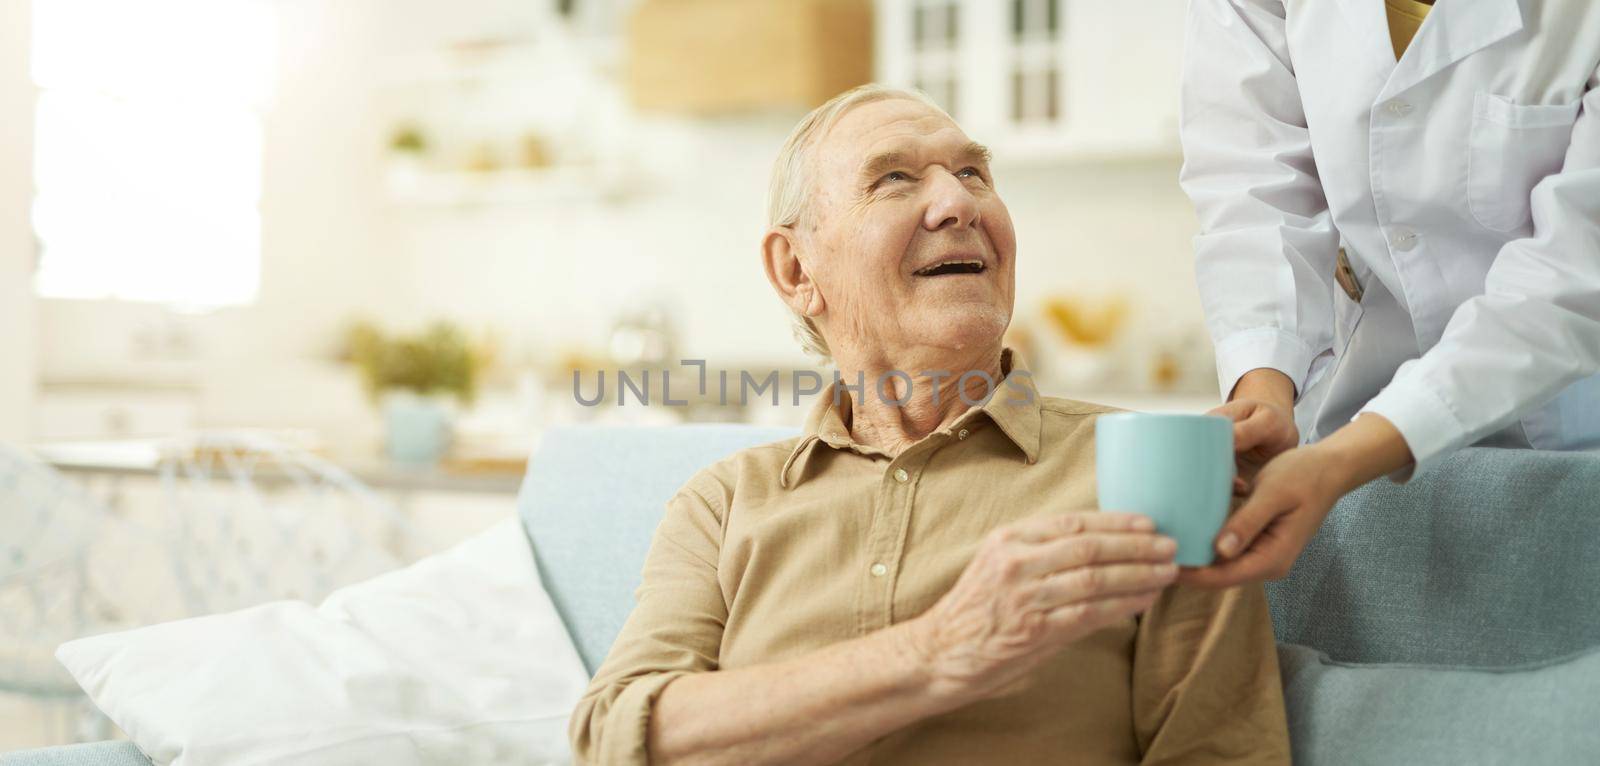 Smiling senior citizen looking at her nurse and going to drink a hot drink at home by friendsstock